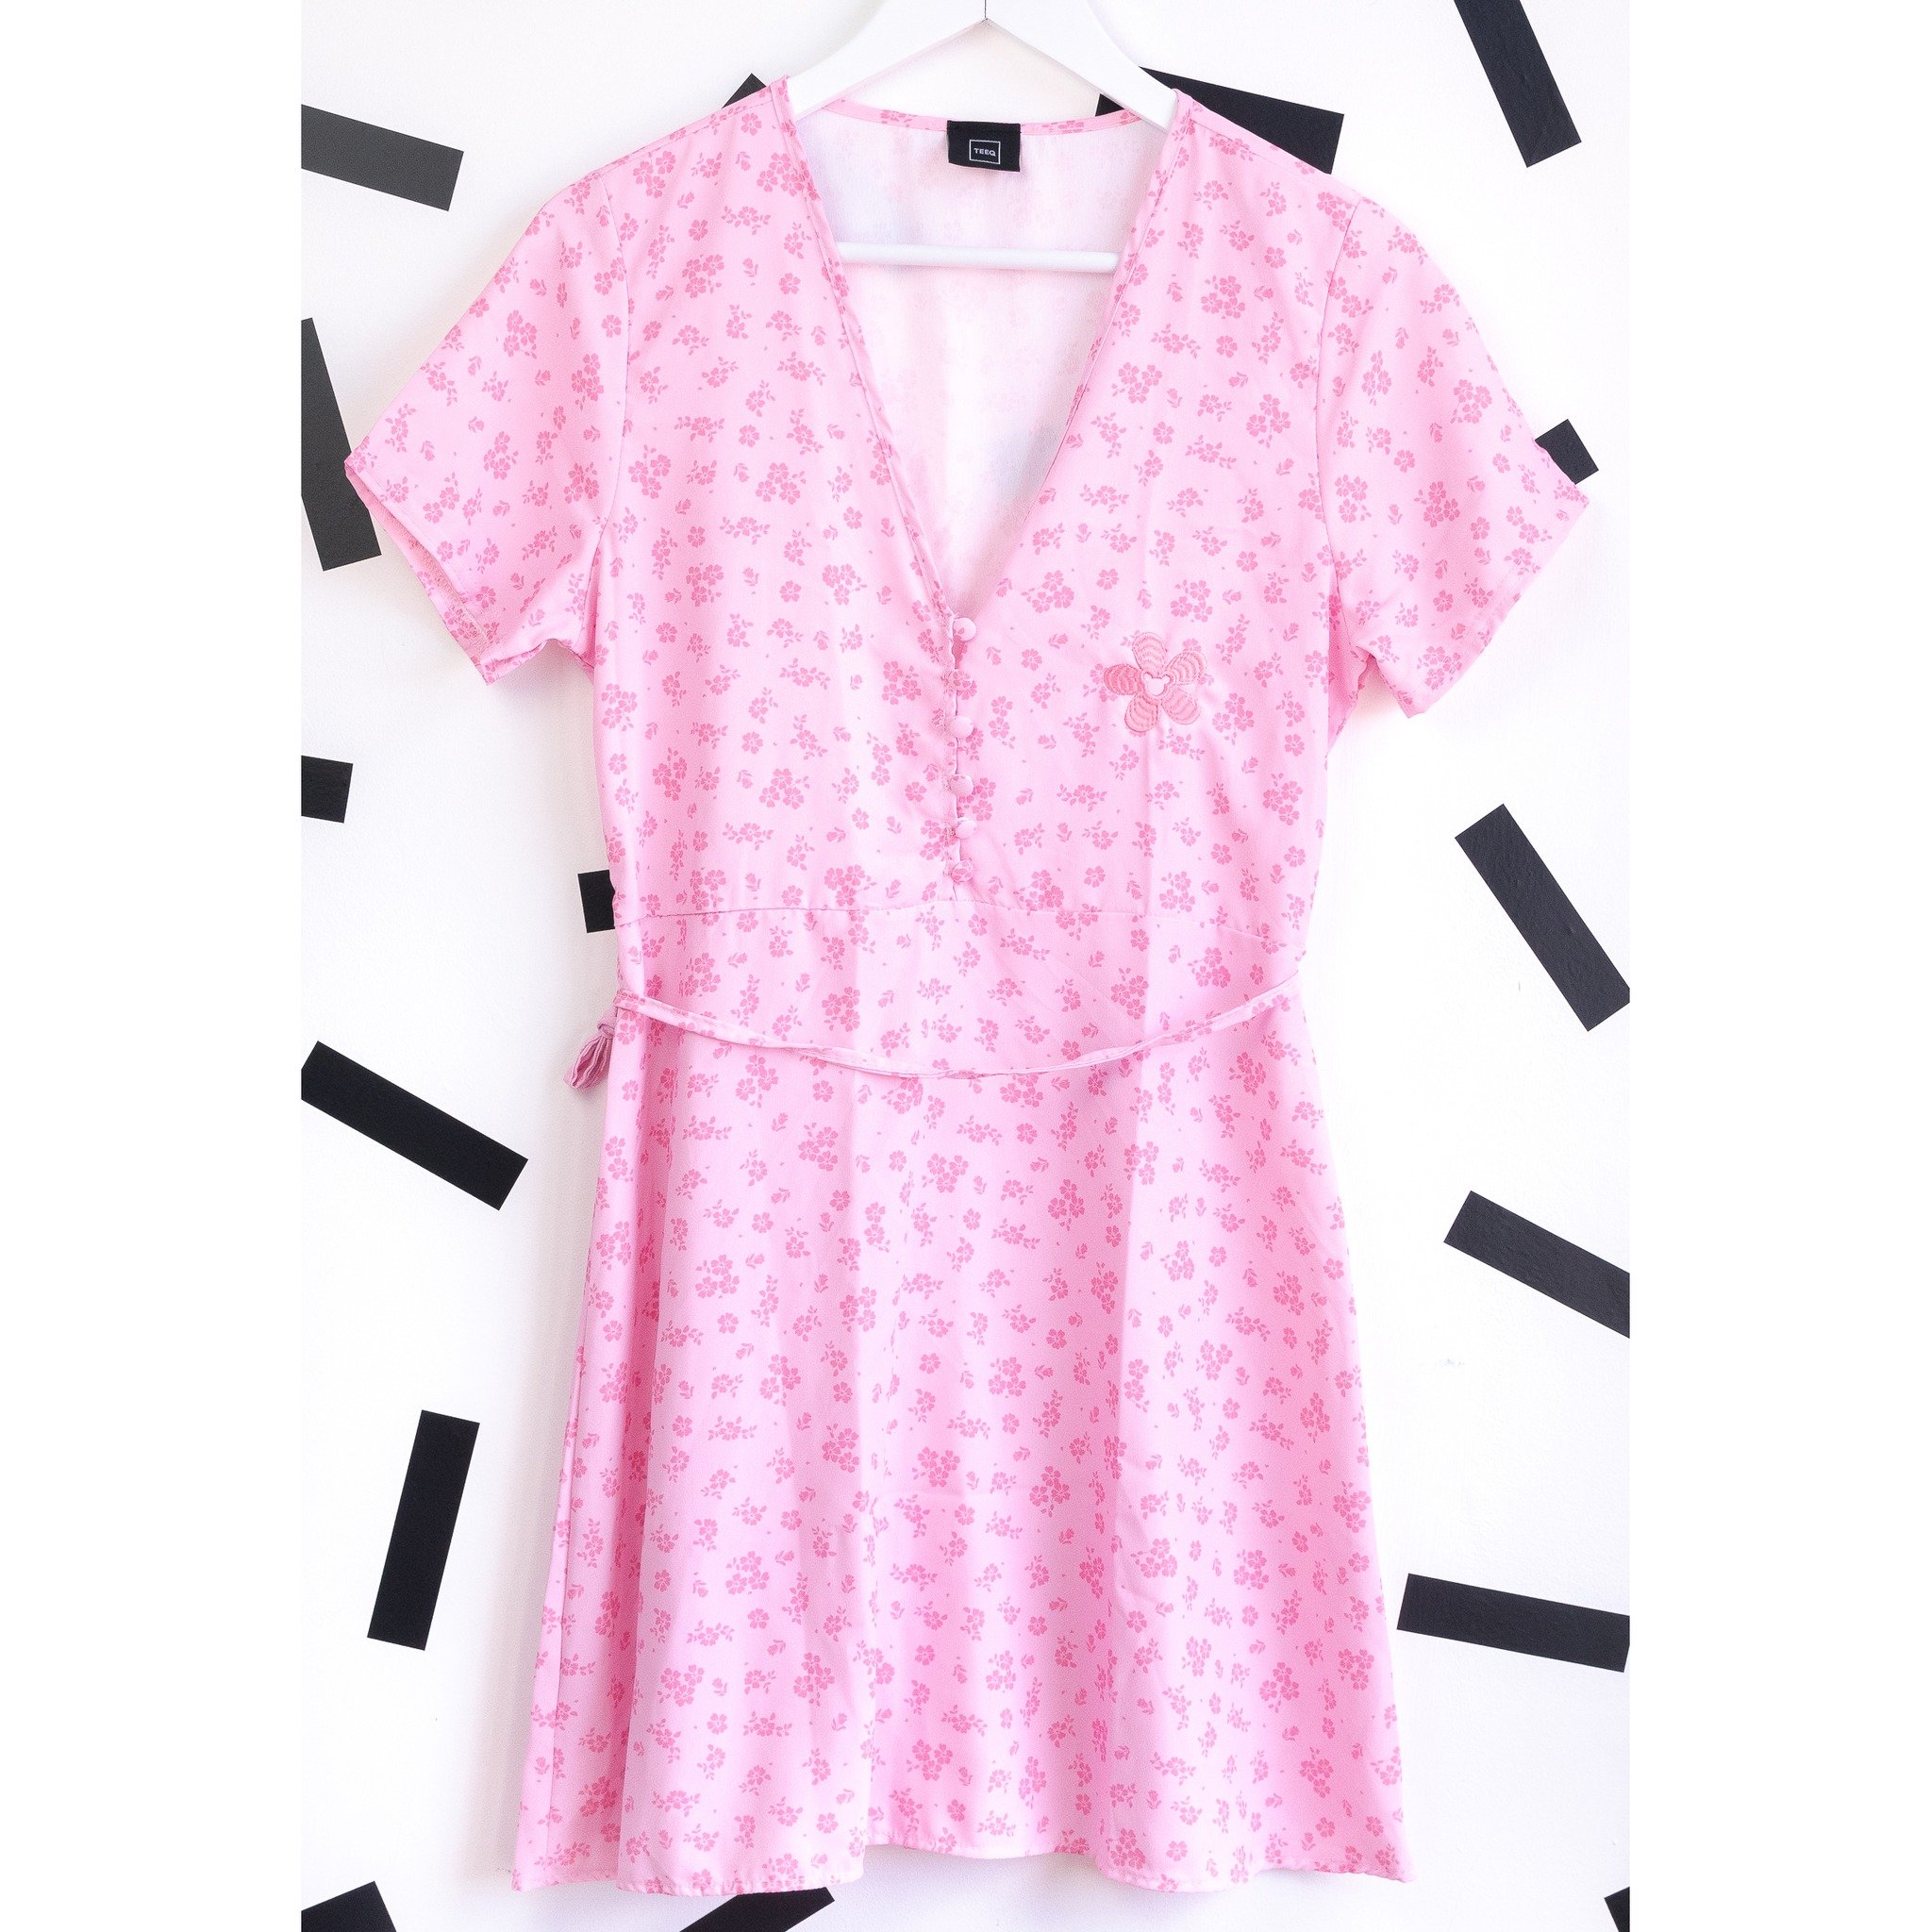 🌸 Introducing our new Floral Mickey flower pink dress! 💗 

This adorable dress features a playful floral pattern with a hidden Mickey, and a sweet pink hue that's perfect for spring and summer. The fitted silhouette is designed to flatter your figu